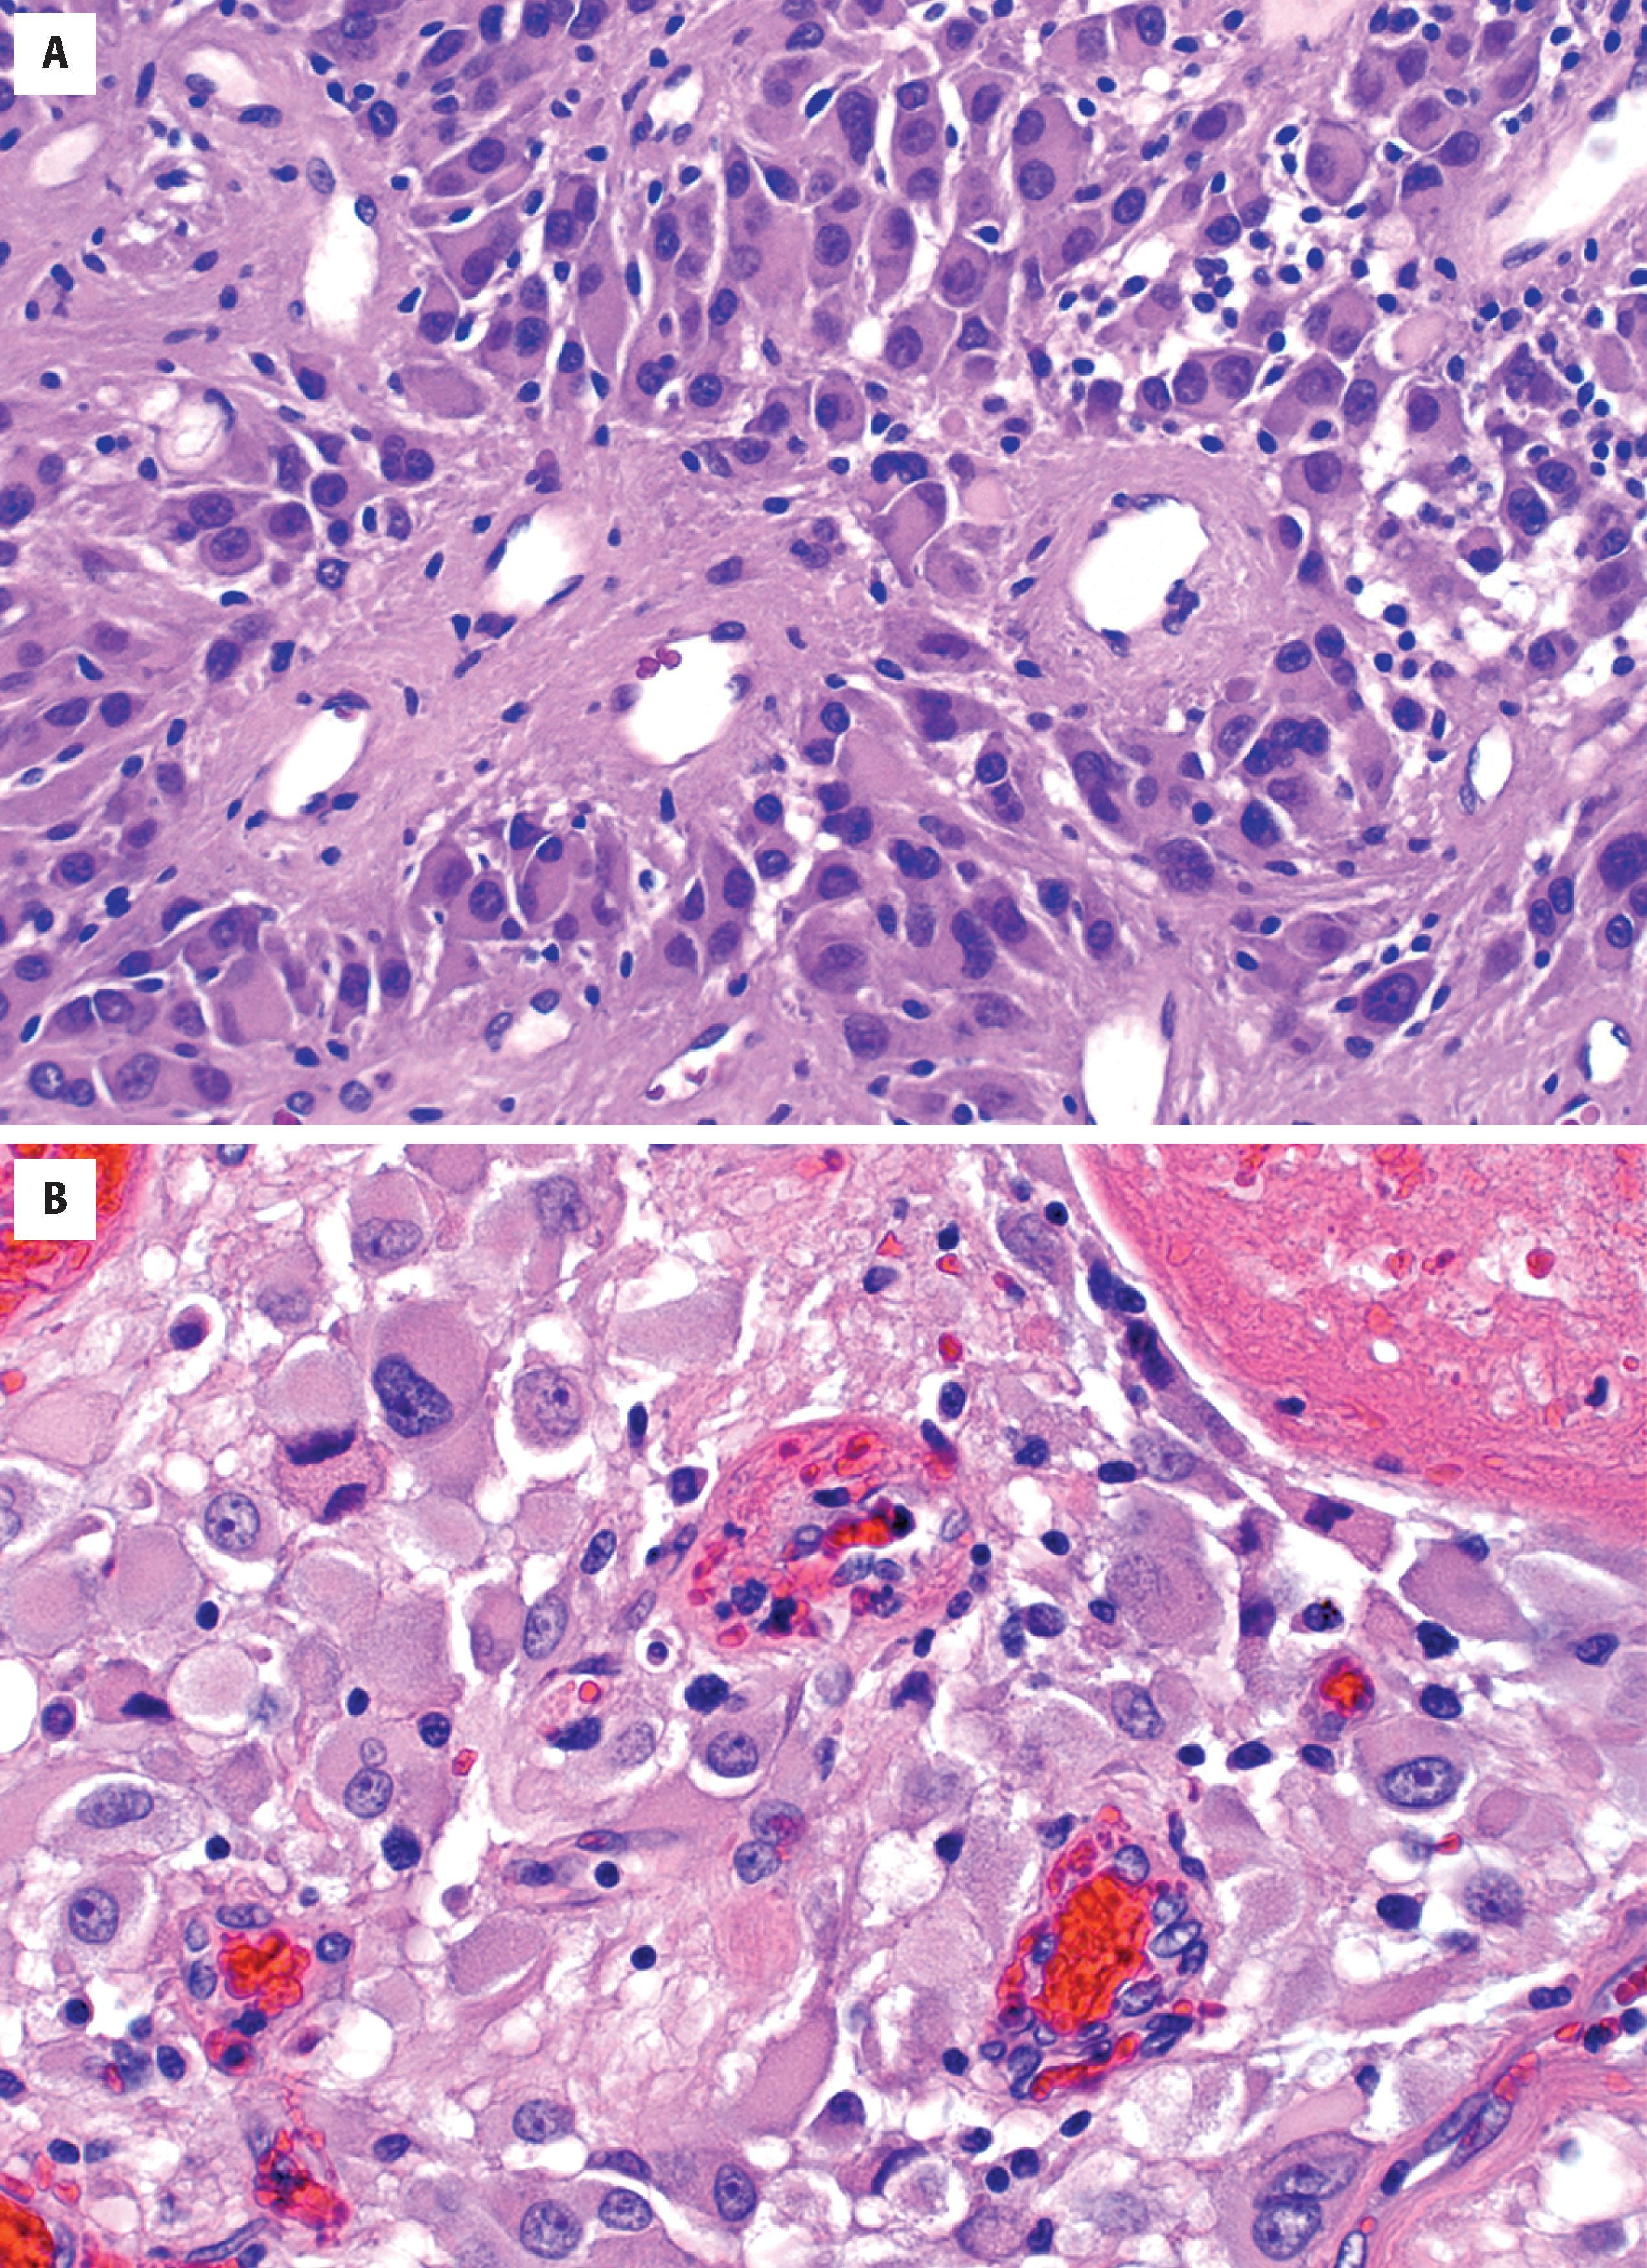 FIGURE 9.10, Examples of subependymal giant cell astrocytoma highlighting perivascular pseudorosettes ( A ) and typical cytologic features ( B ), including neuronal-like nuclei and astrocyte-like cytoplasm.